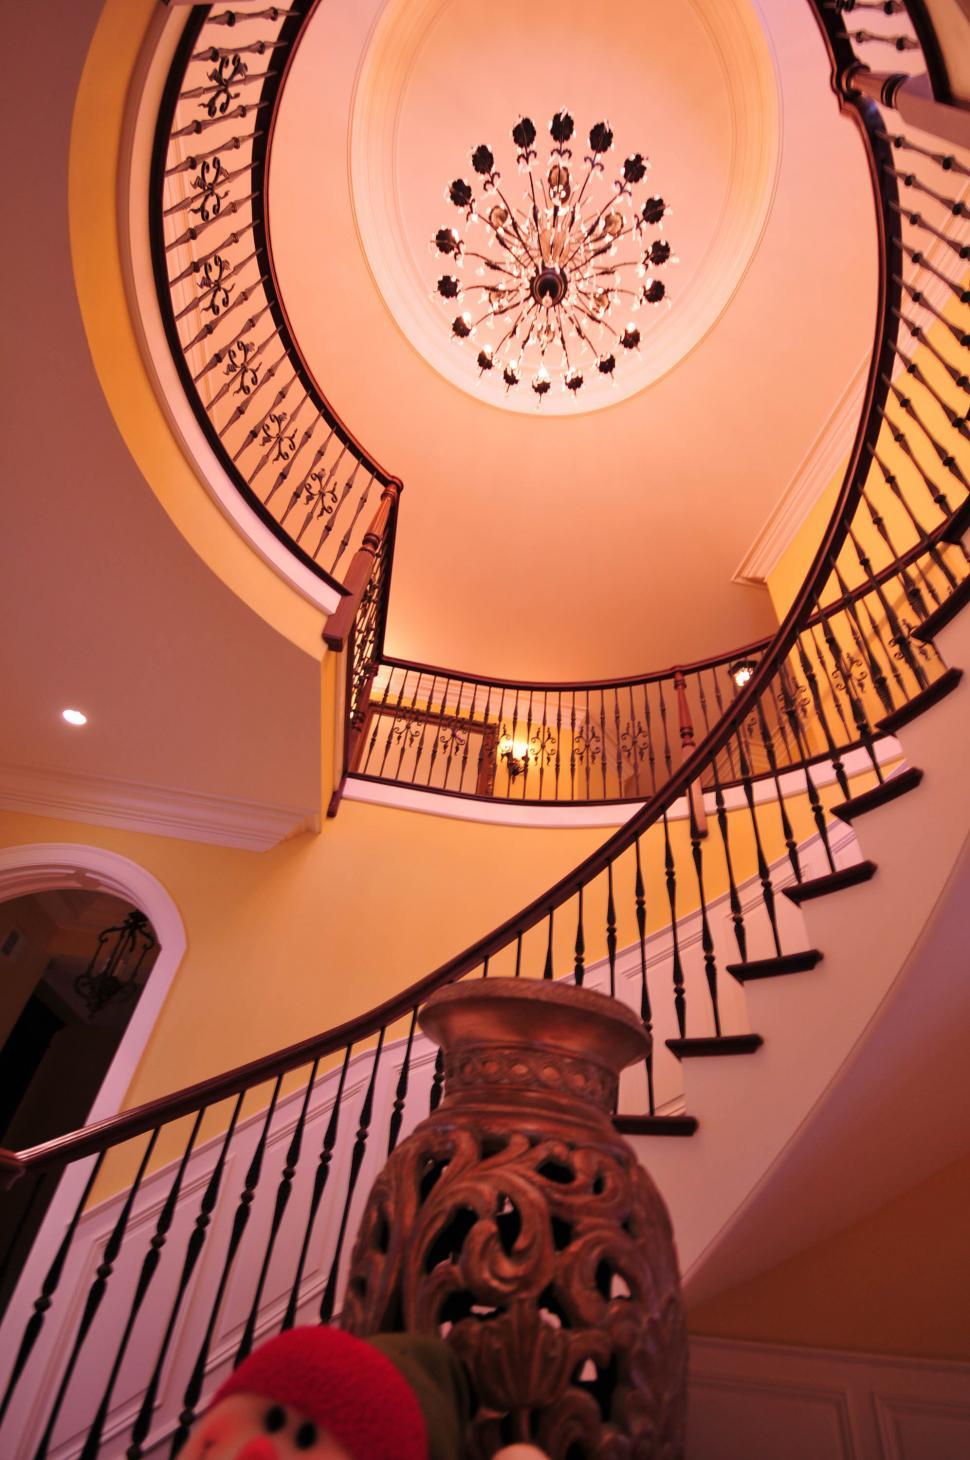 Free Image of Spiral staircase 